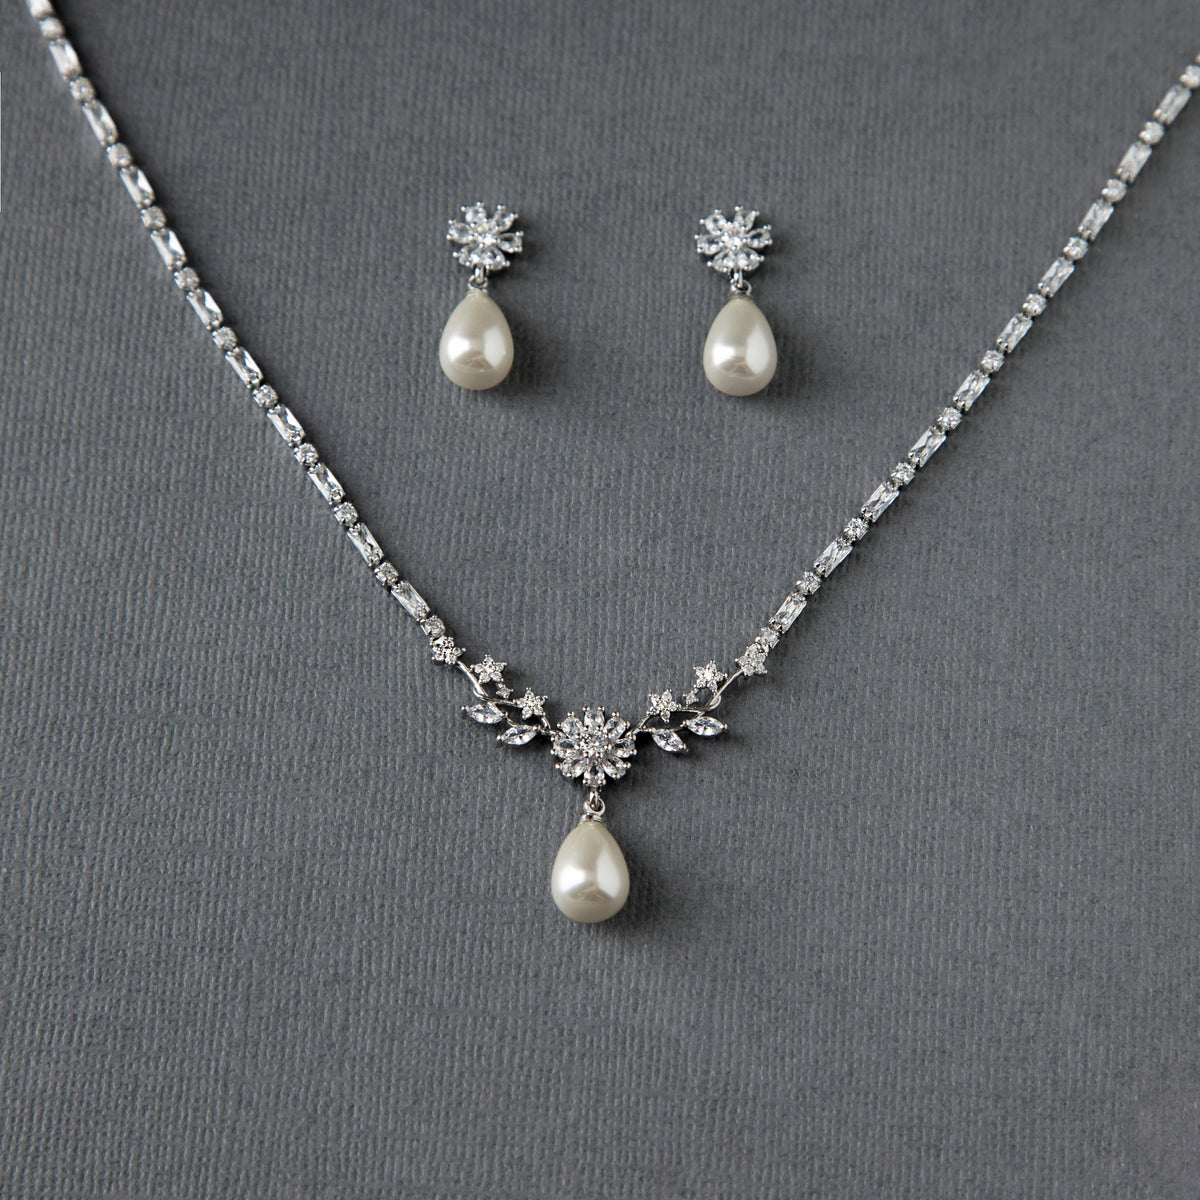 Baguette CZ Necklace Set with Ivory Teardrop Pearls